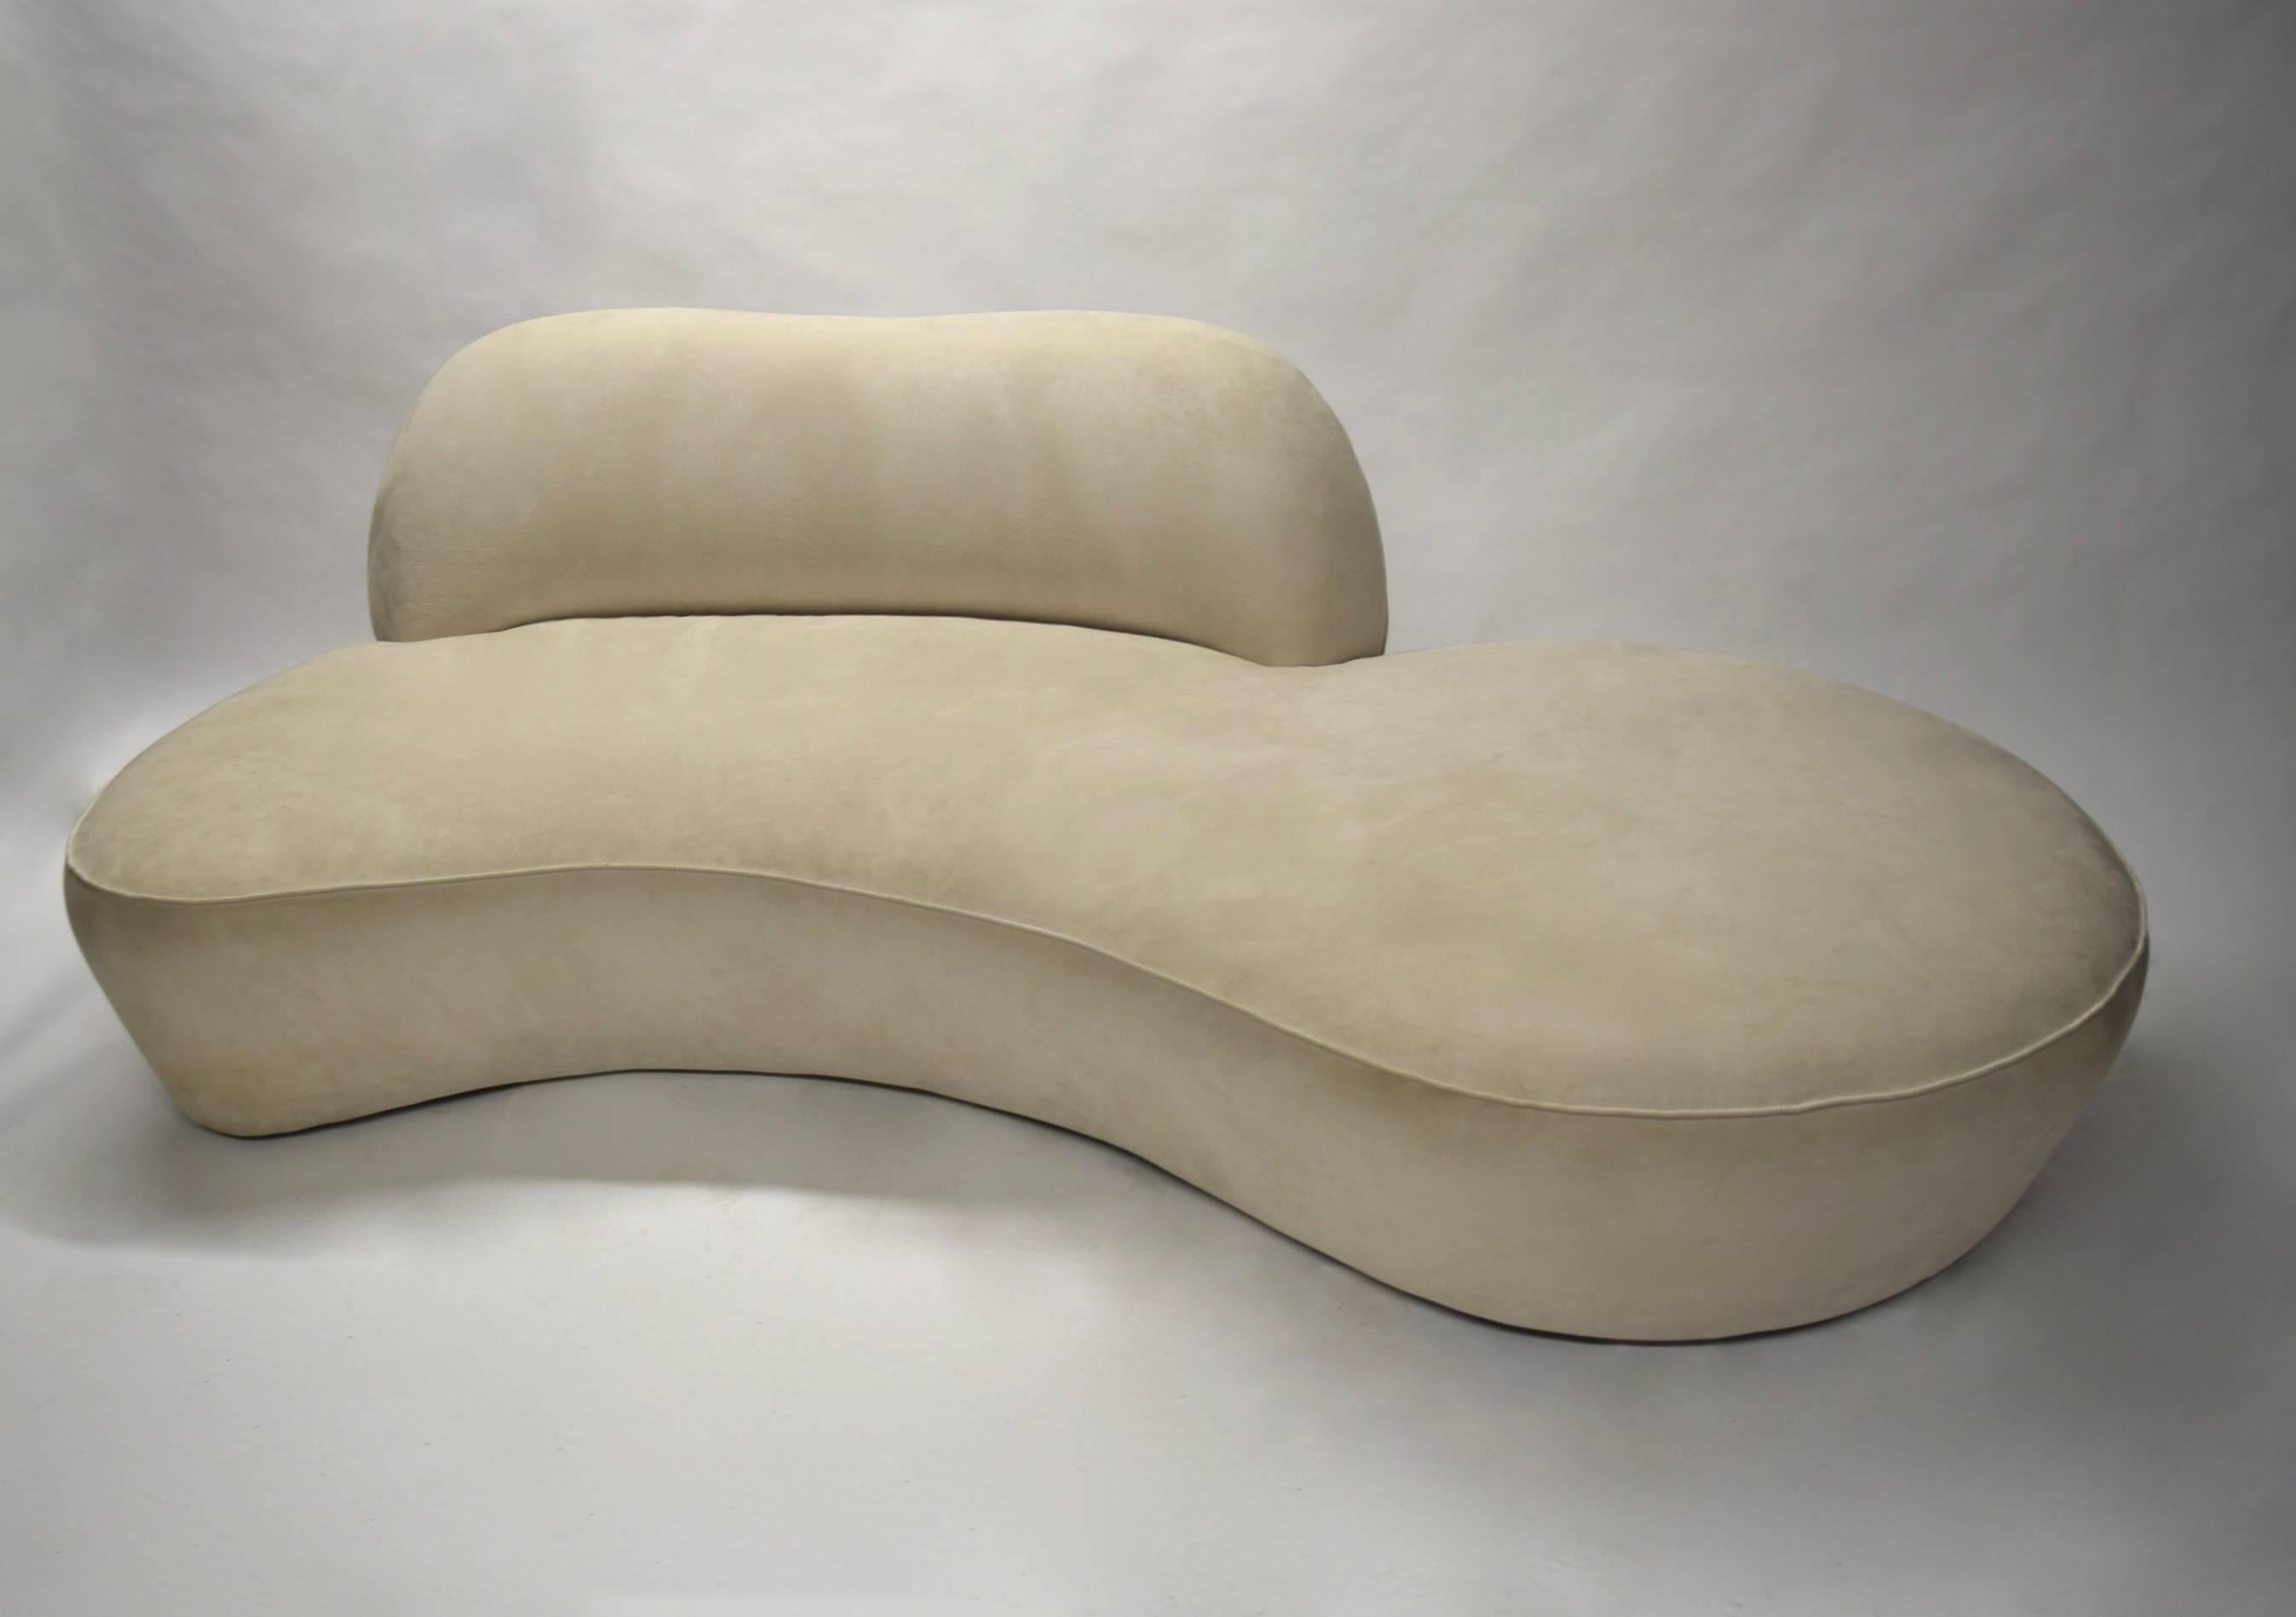 Sofa is in original off white microsuede. Single owner lightly used in great vintage condition.